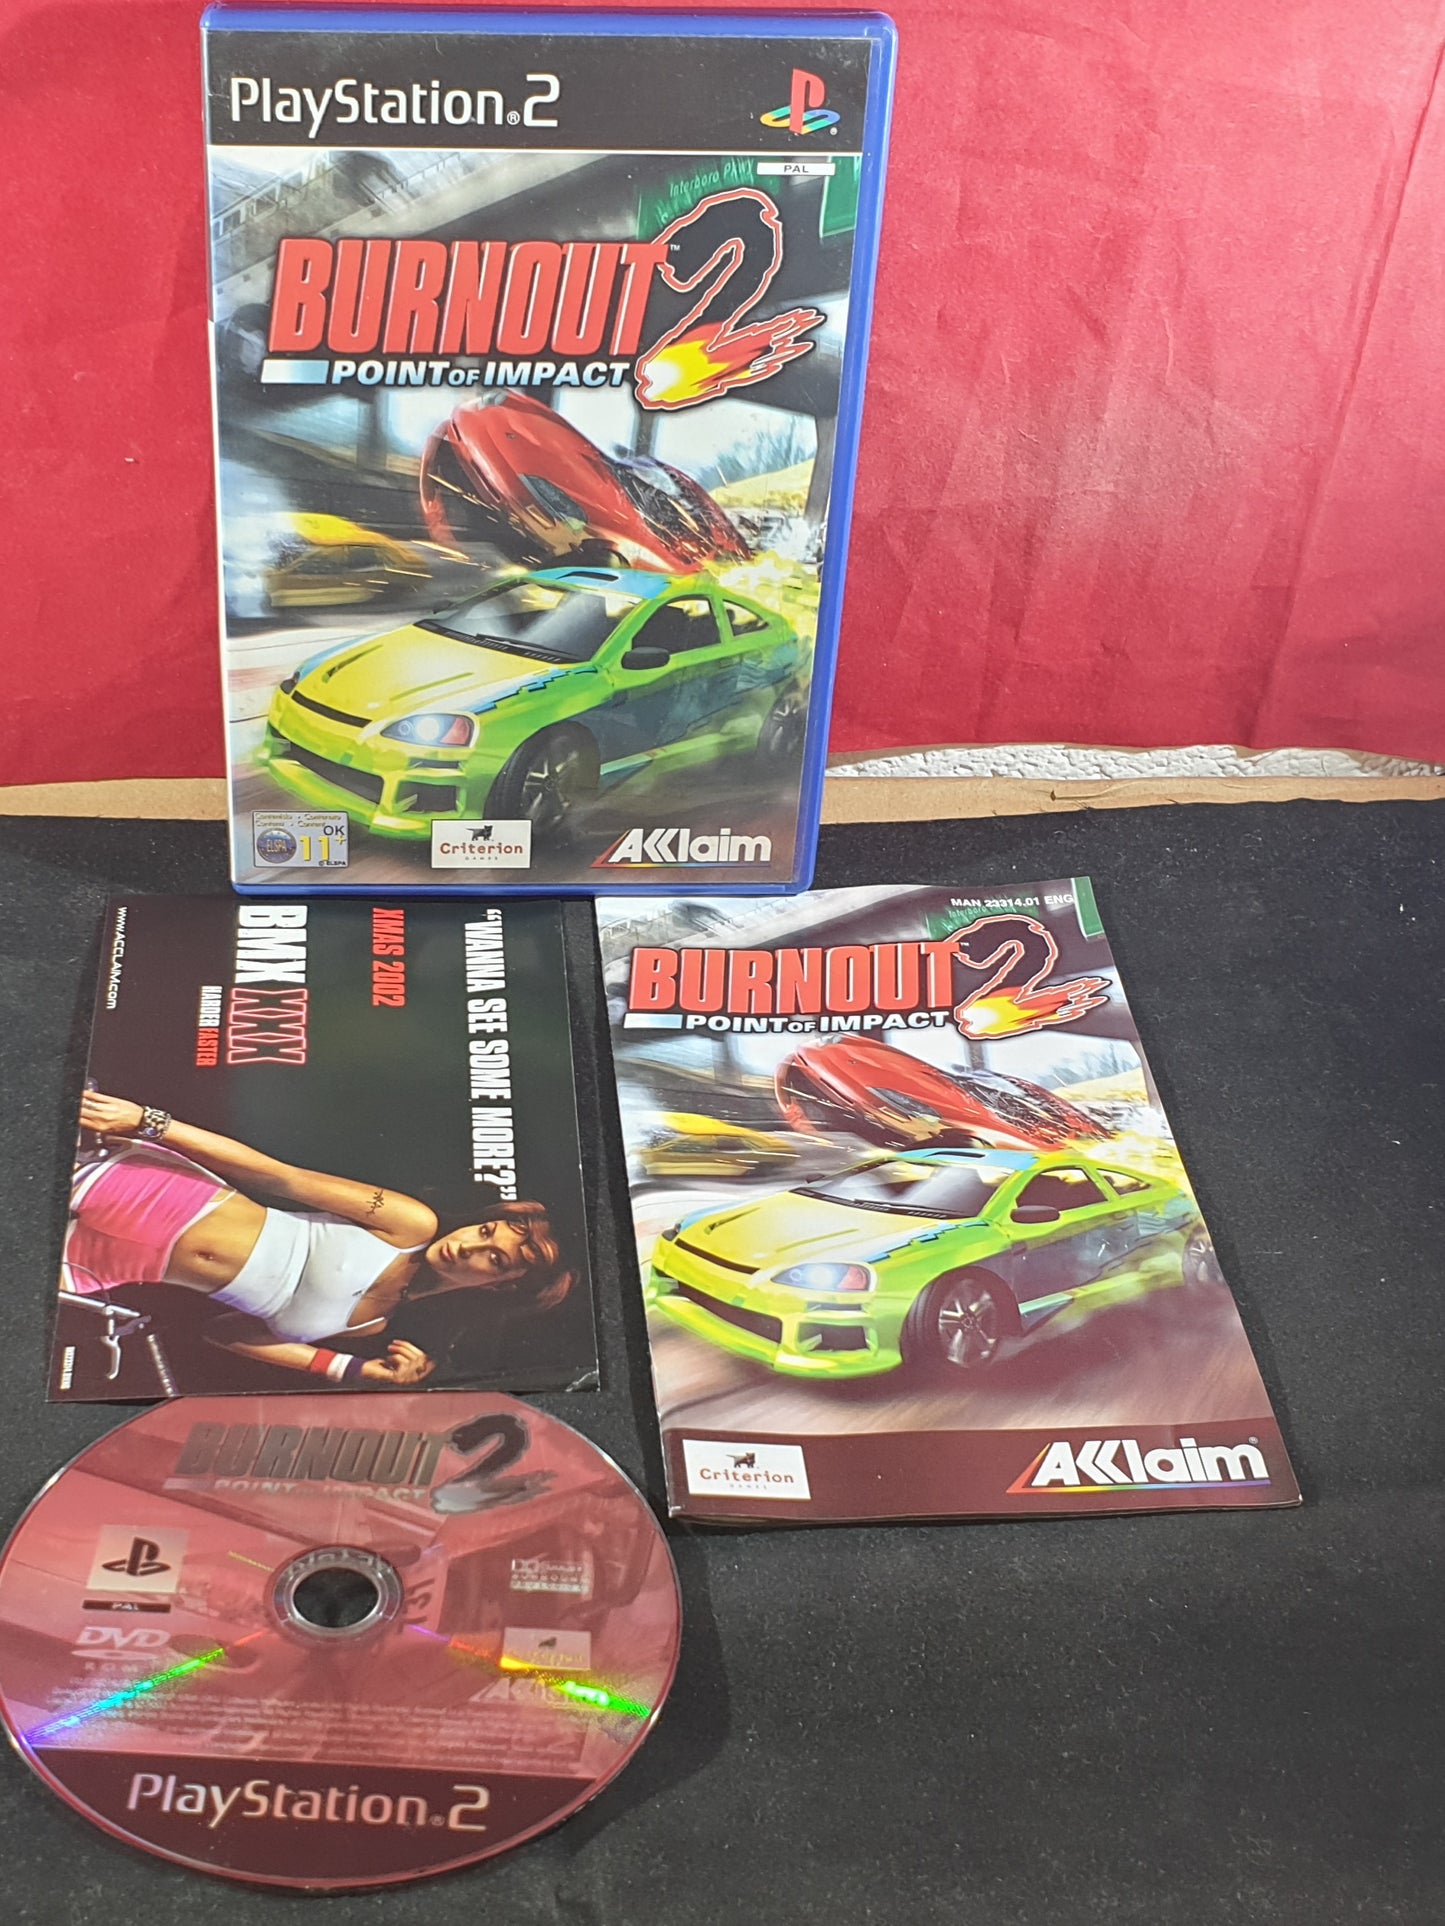 Burnout 2 Point of Impact Black Label Sony Playstation 2 (PS2) Game